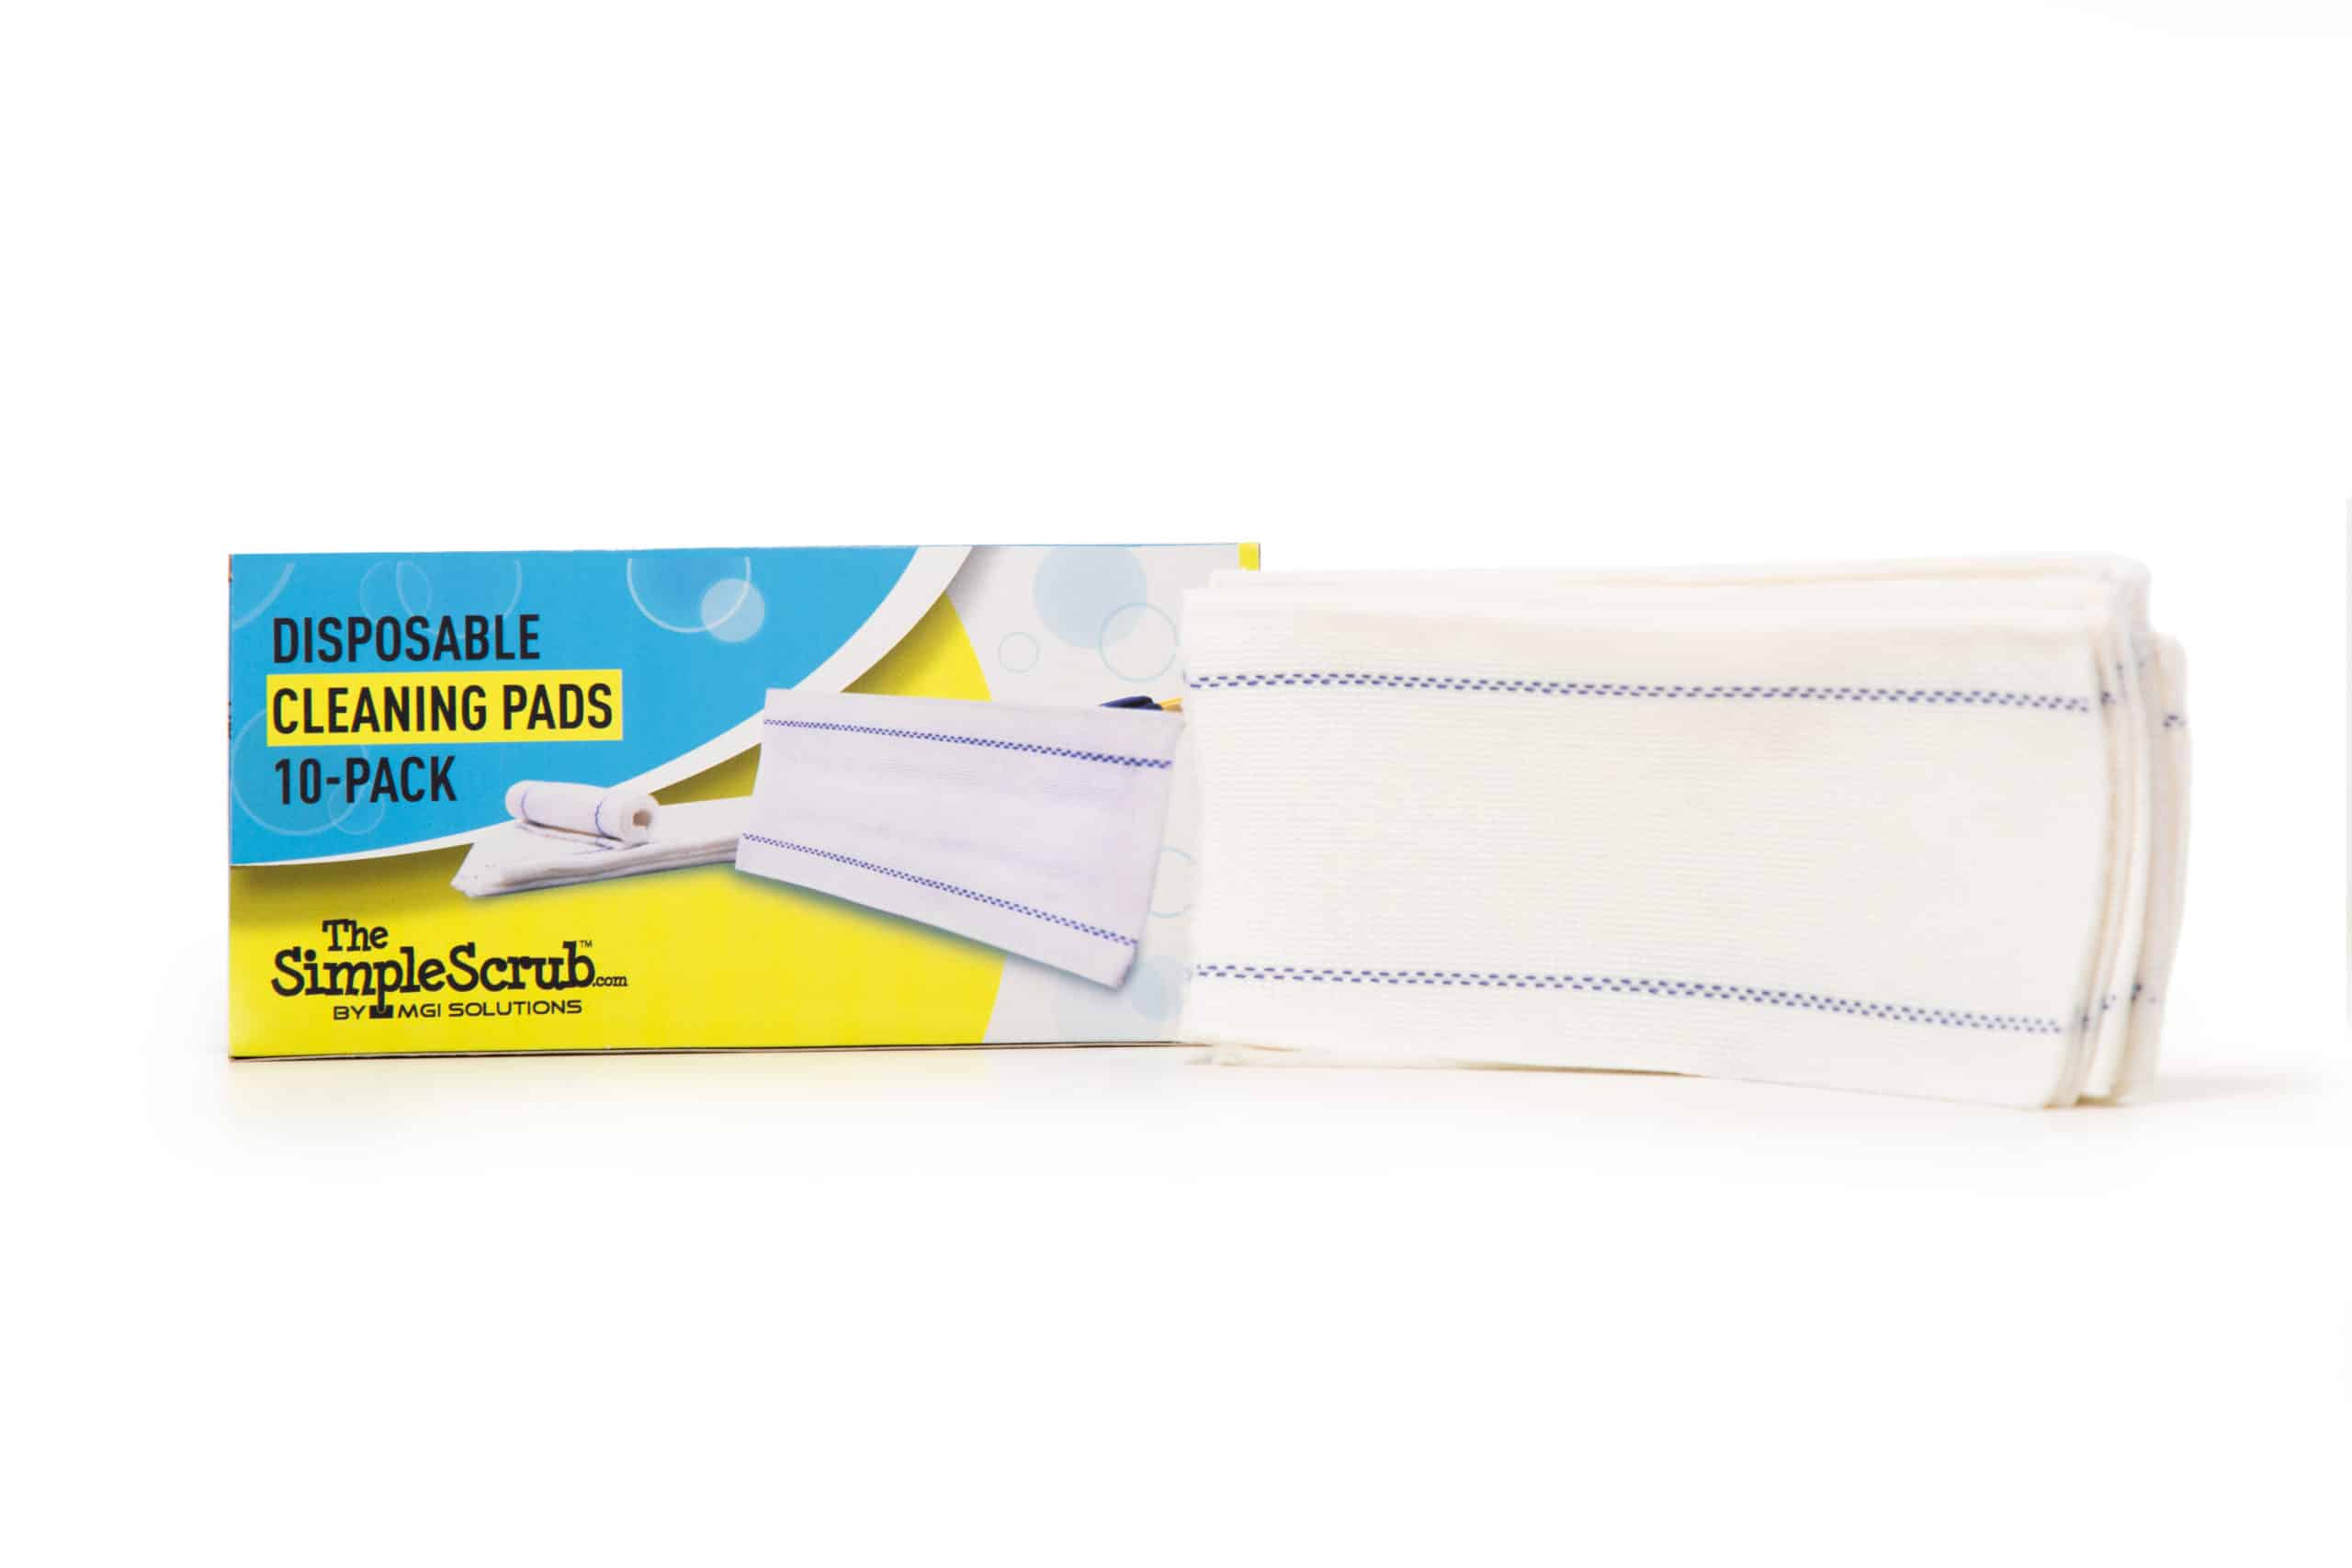 The Simple Scrub disposable cleaning pads are great one-time use pads for the dirtiest areas like behind the toilet.